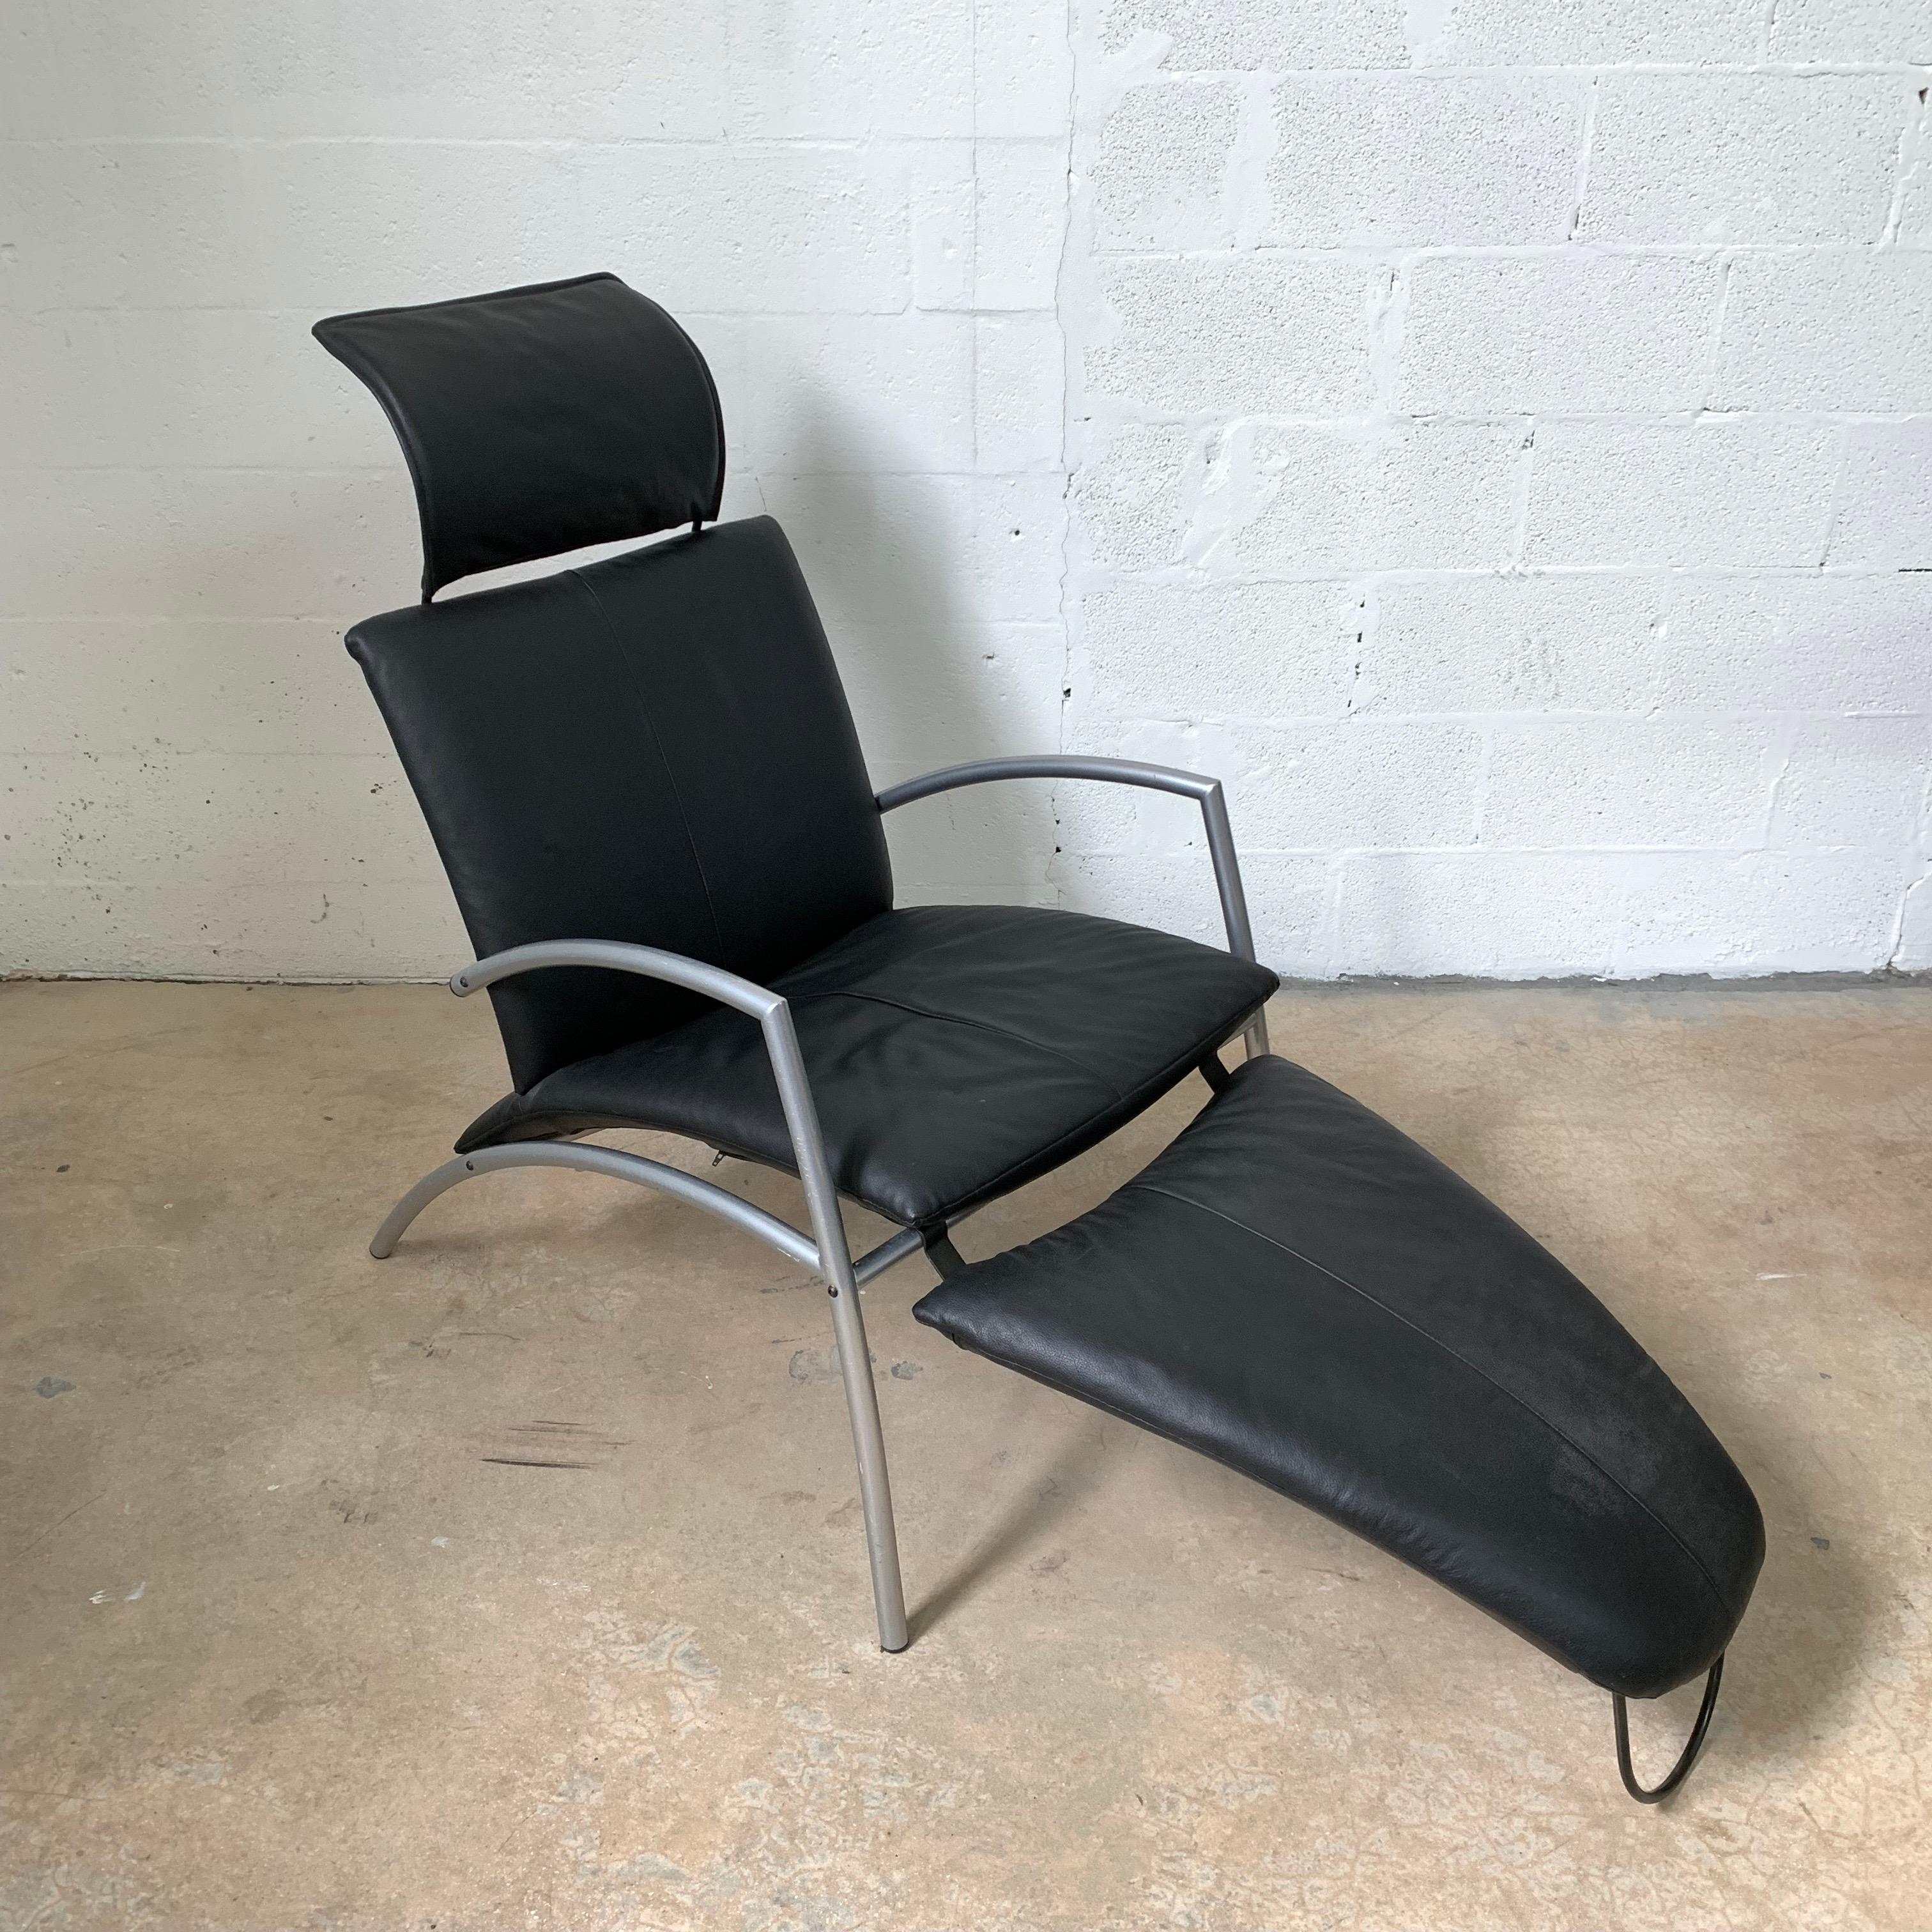 Black leather Kebe lounge or armchair with detachable footrest, Denmark, 1980s

Single chair dimensions without footrest:
36 deep
26